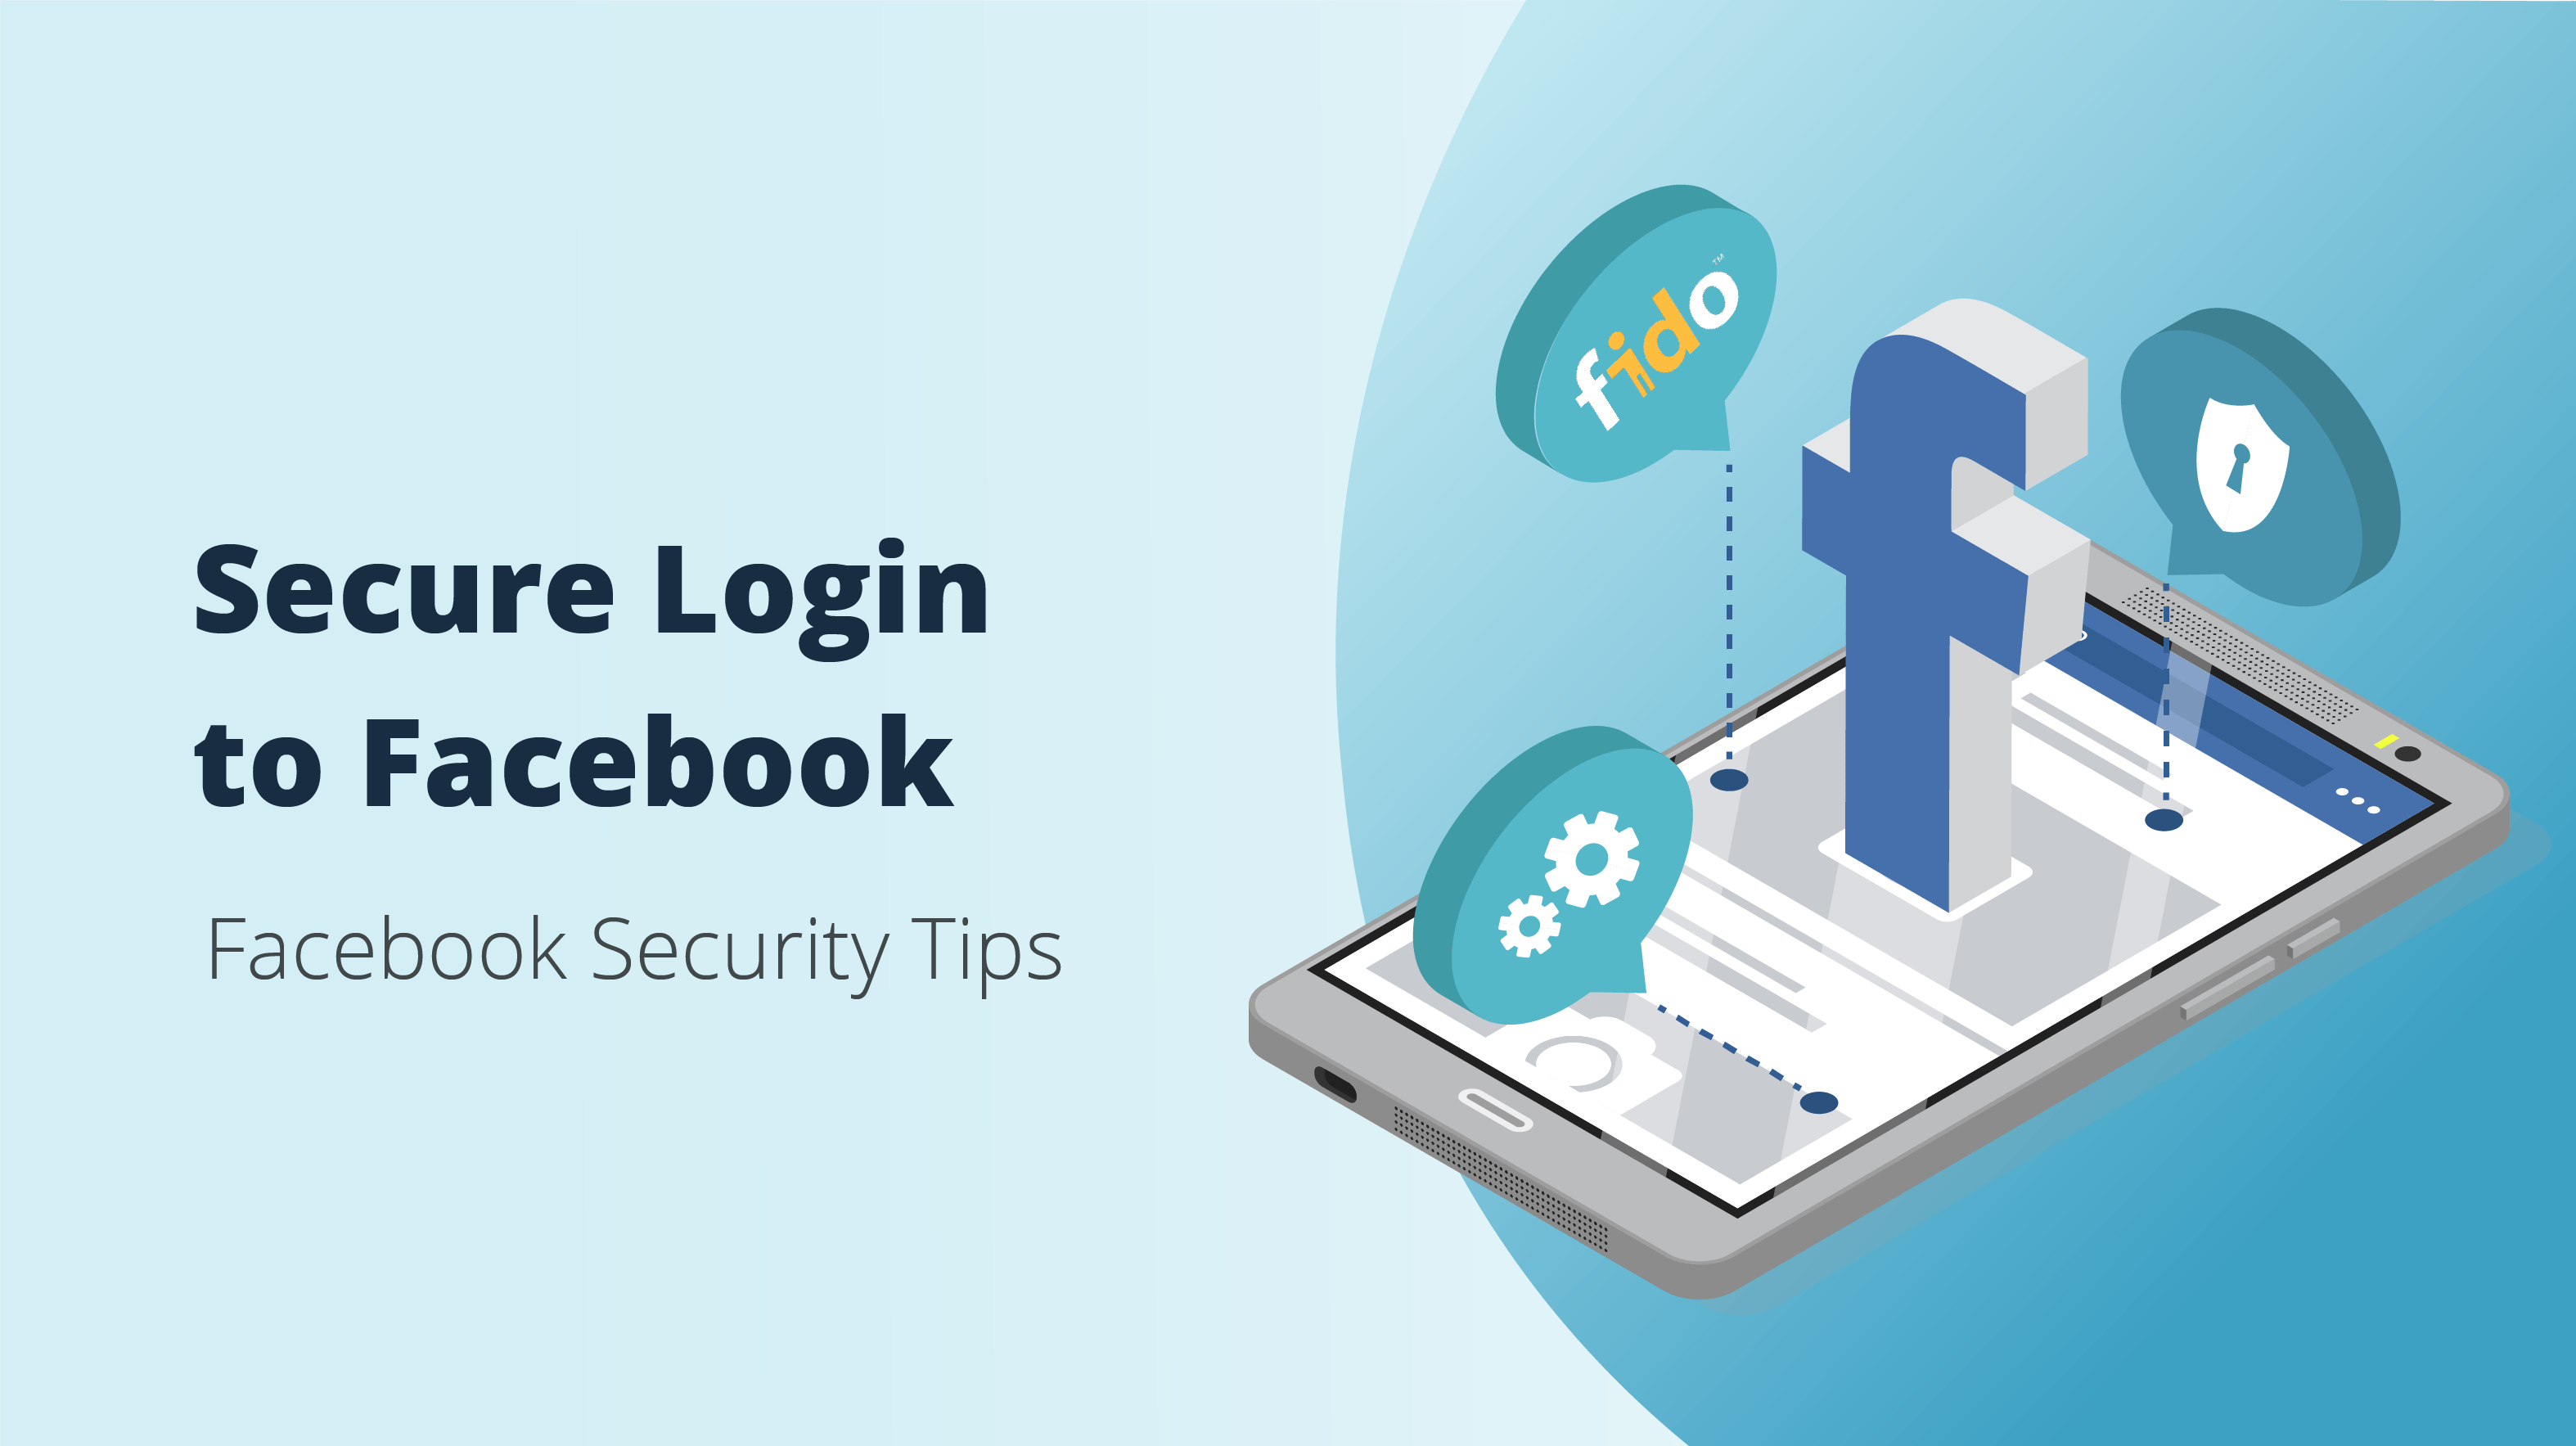 <b>Fast and Secure Login to Facebook [Facebook Security Tips]</b>